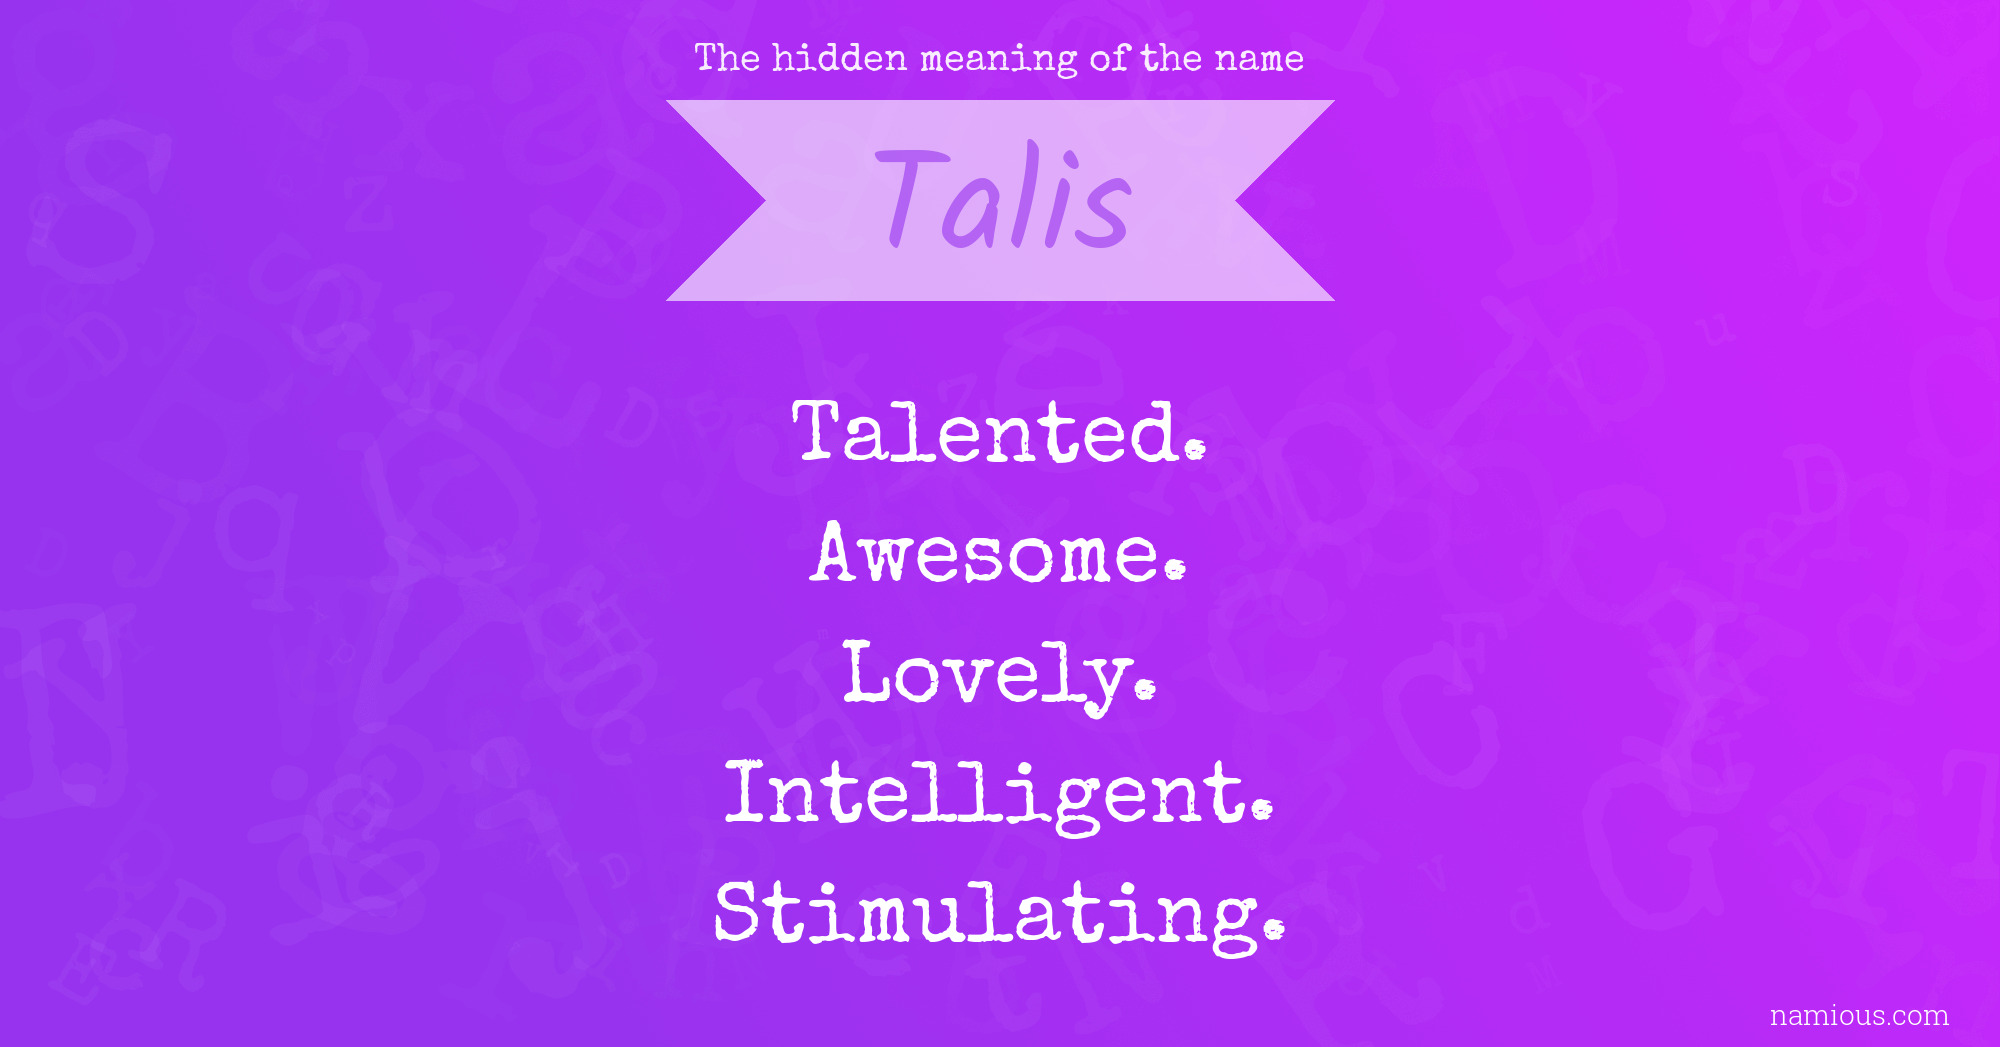 The hidden meaning of the name Talis